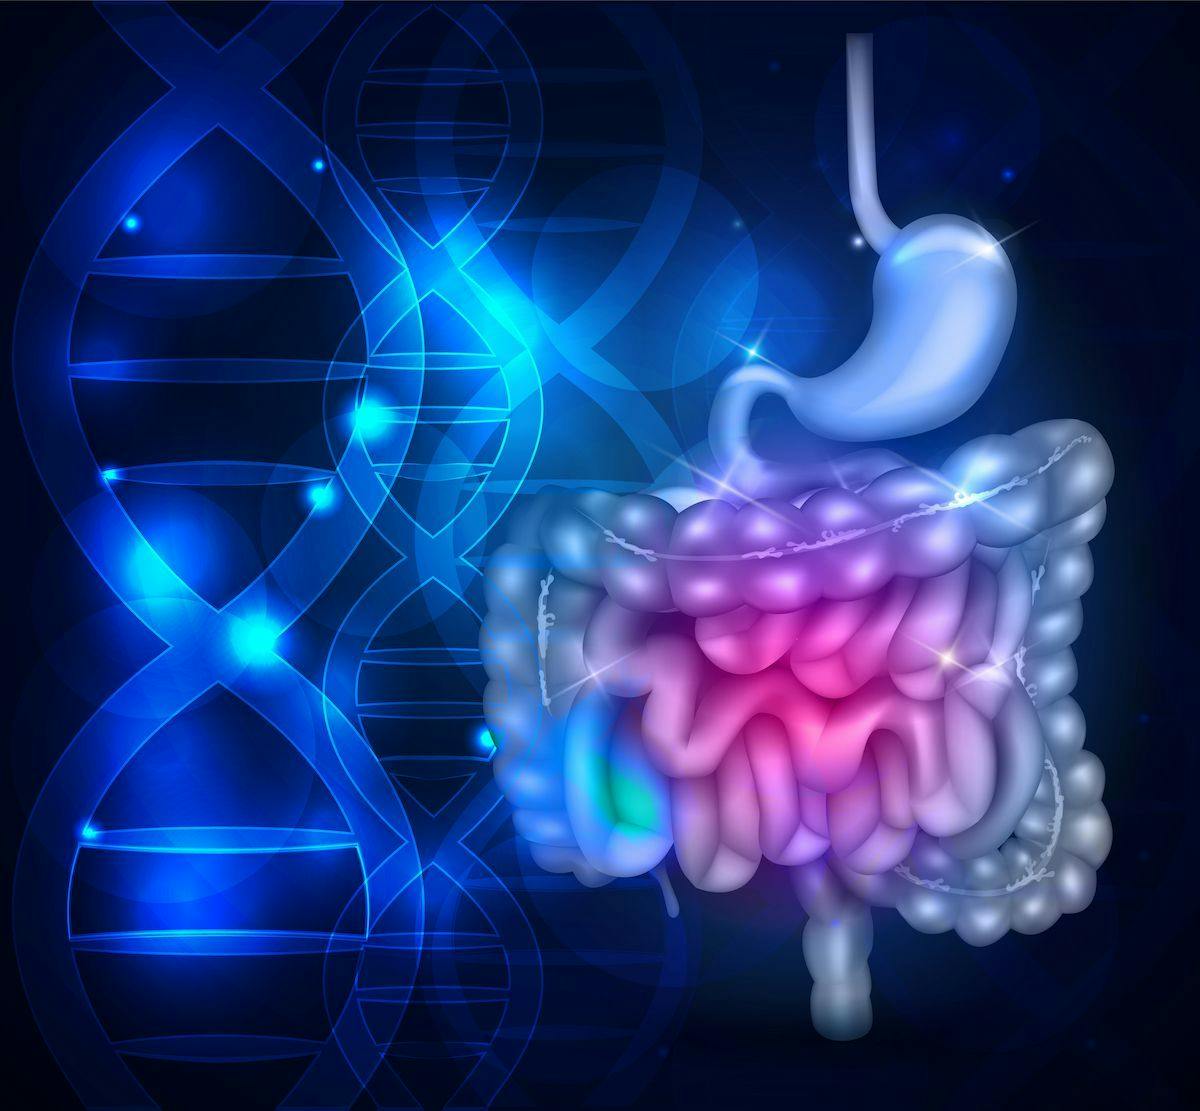 Young Age Appears Predictive of Relapse in High-Risk Stage III Colorectal Cancer